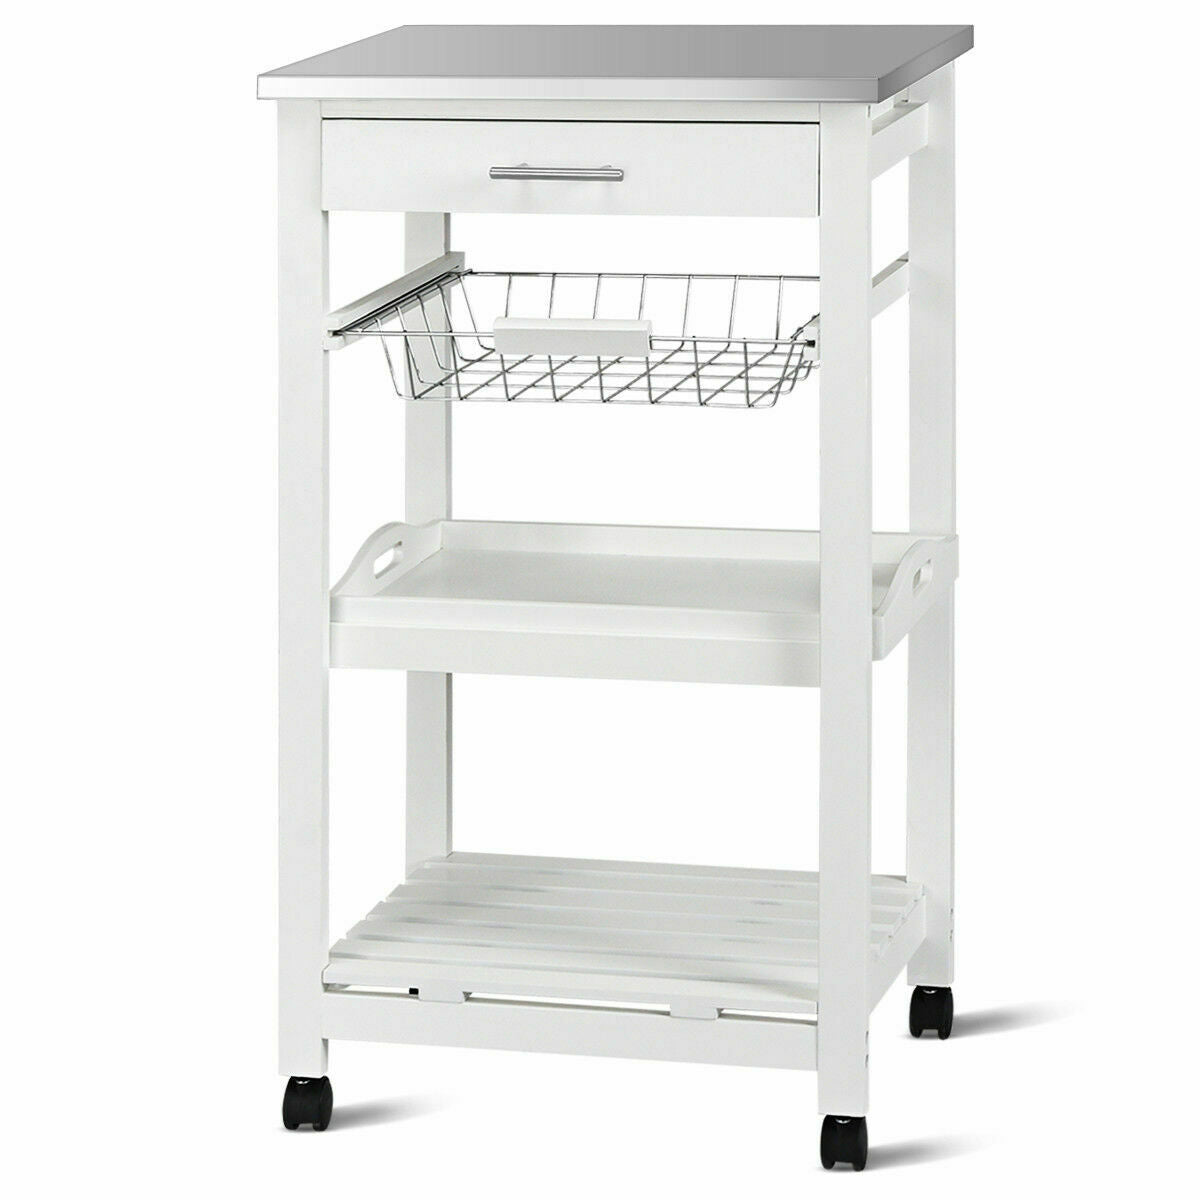 Costway Rolling Kitchen Trolley Cart Steel White Top Removable Tray W/Storage Basket andDrawers